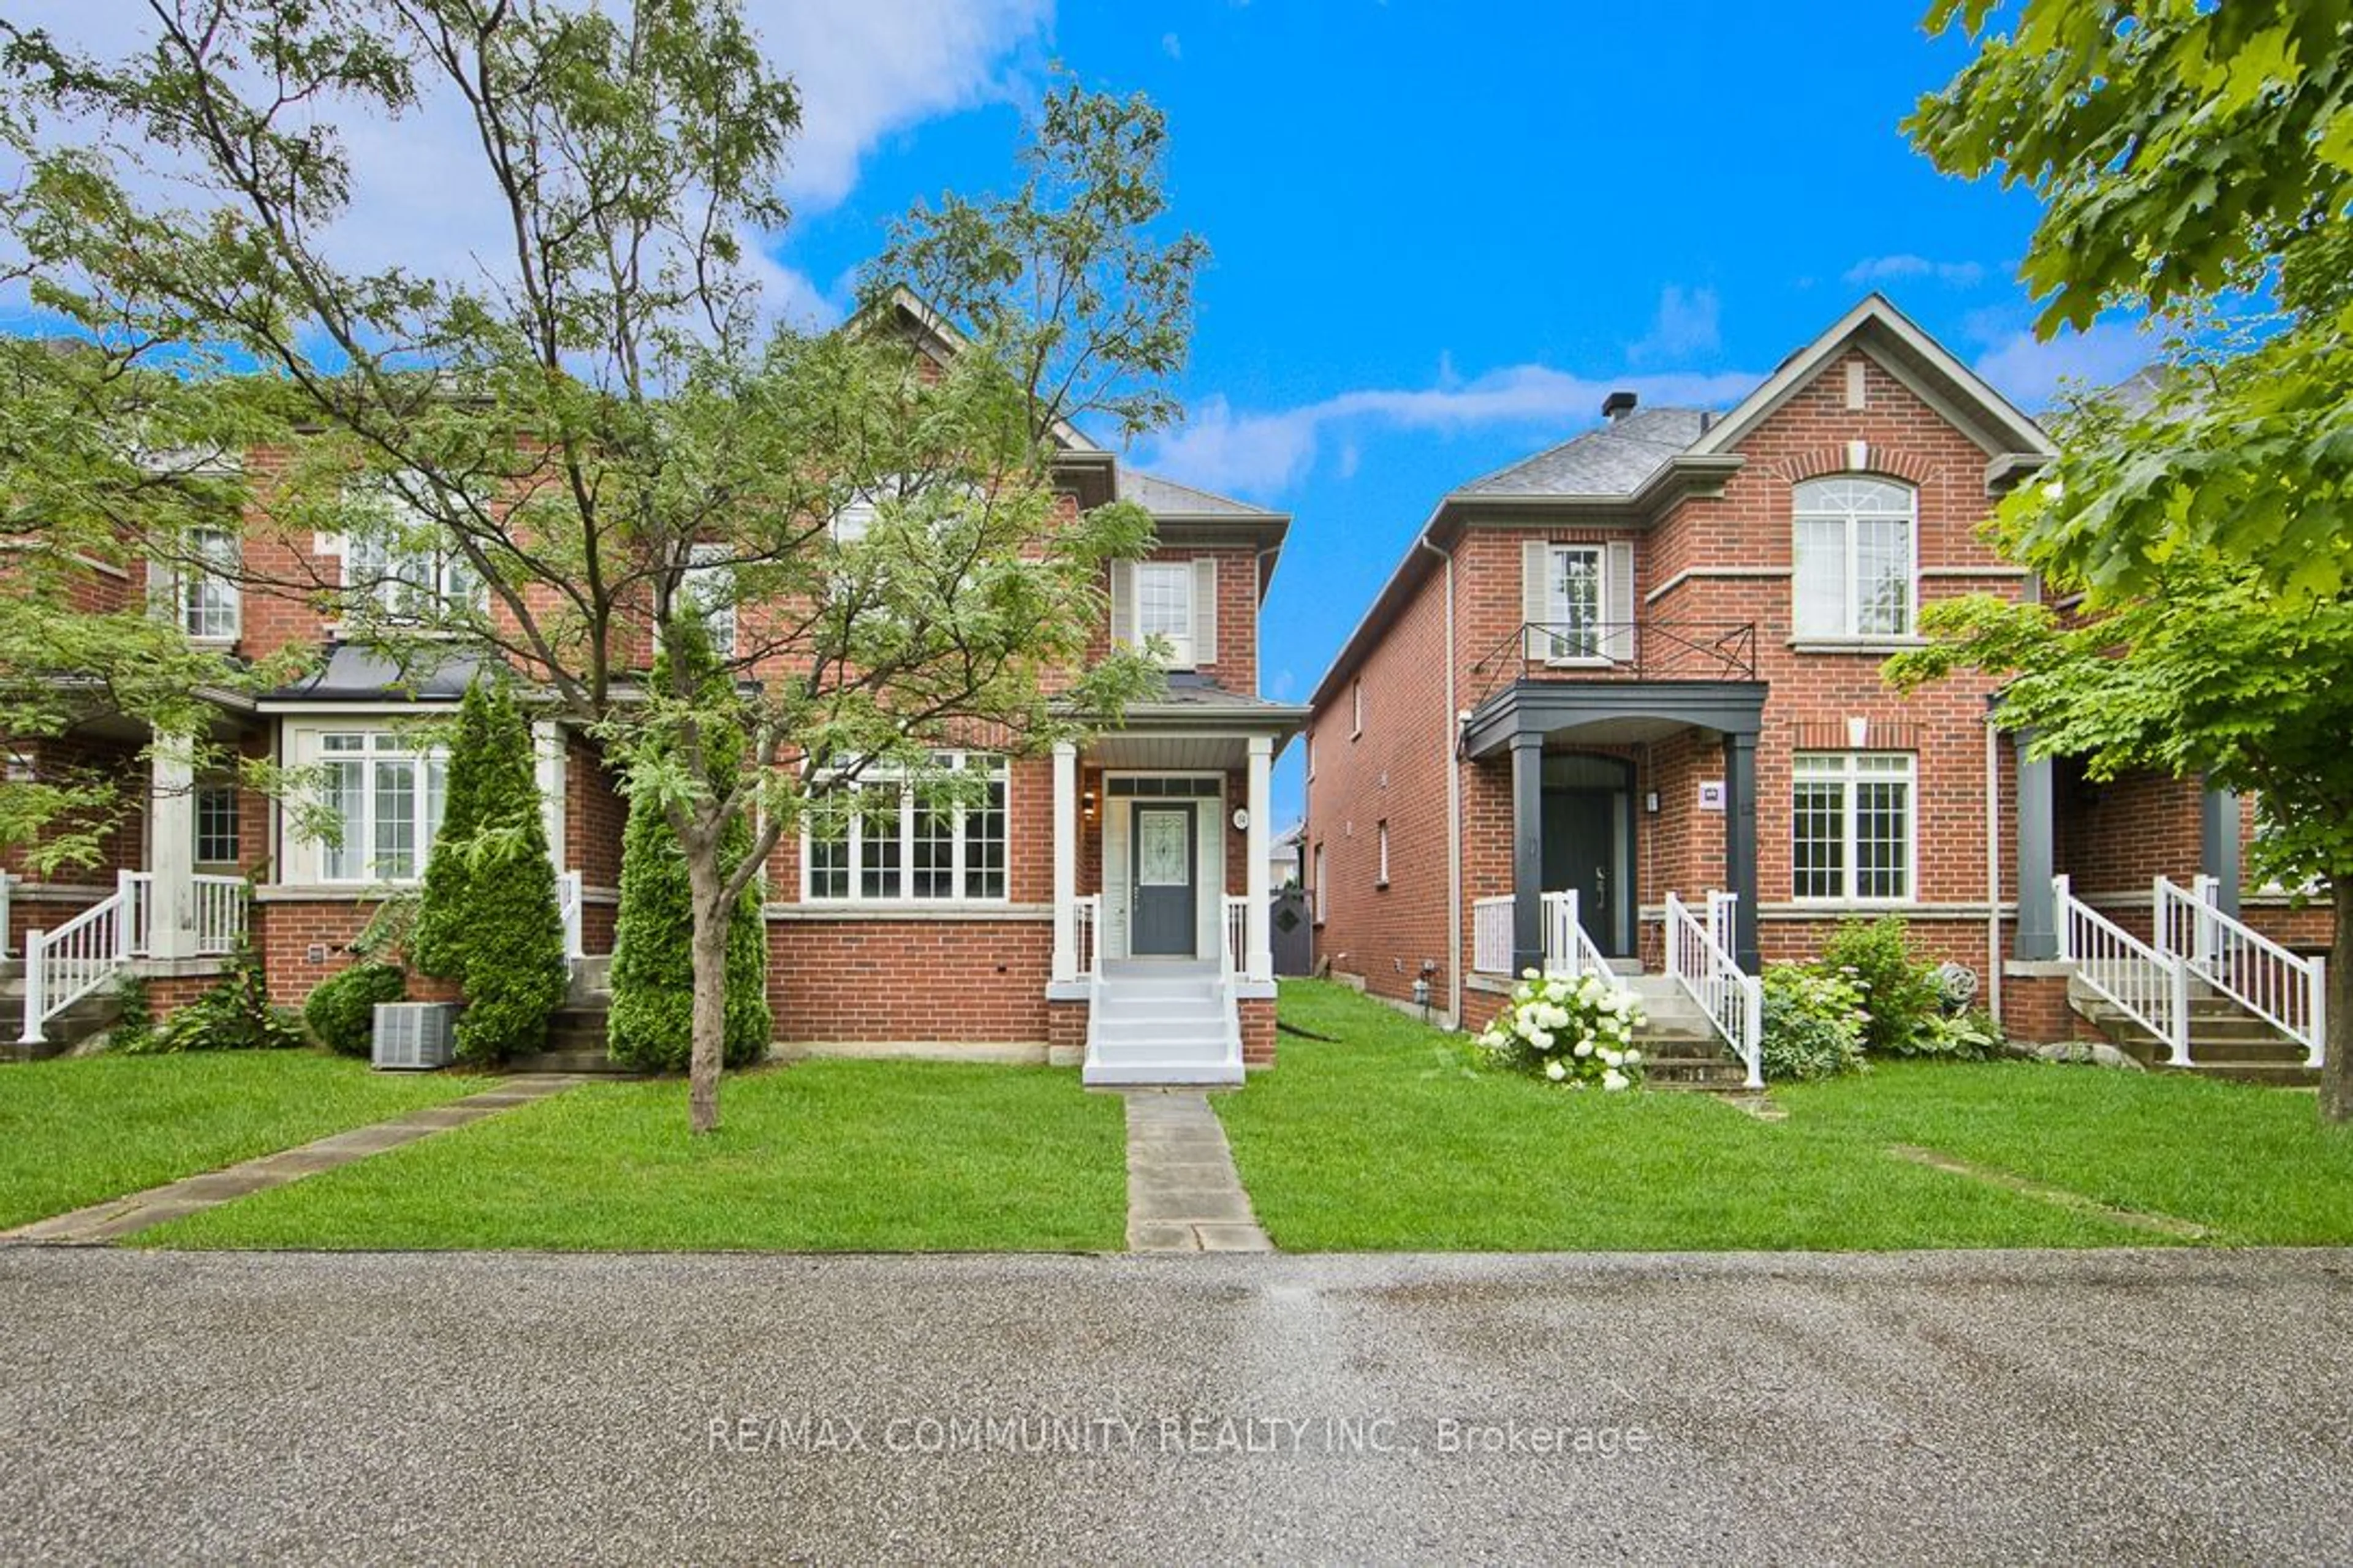 Home with brick exterior material for 14 Montagues Lane, Markham Ontario L6B 0A3